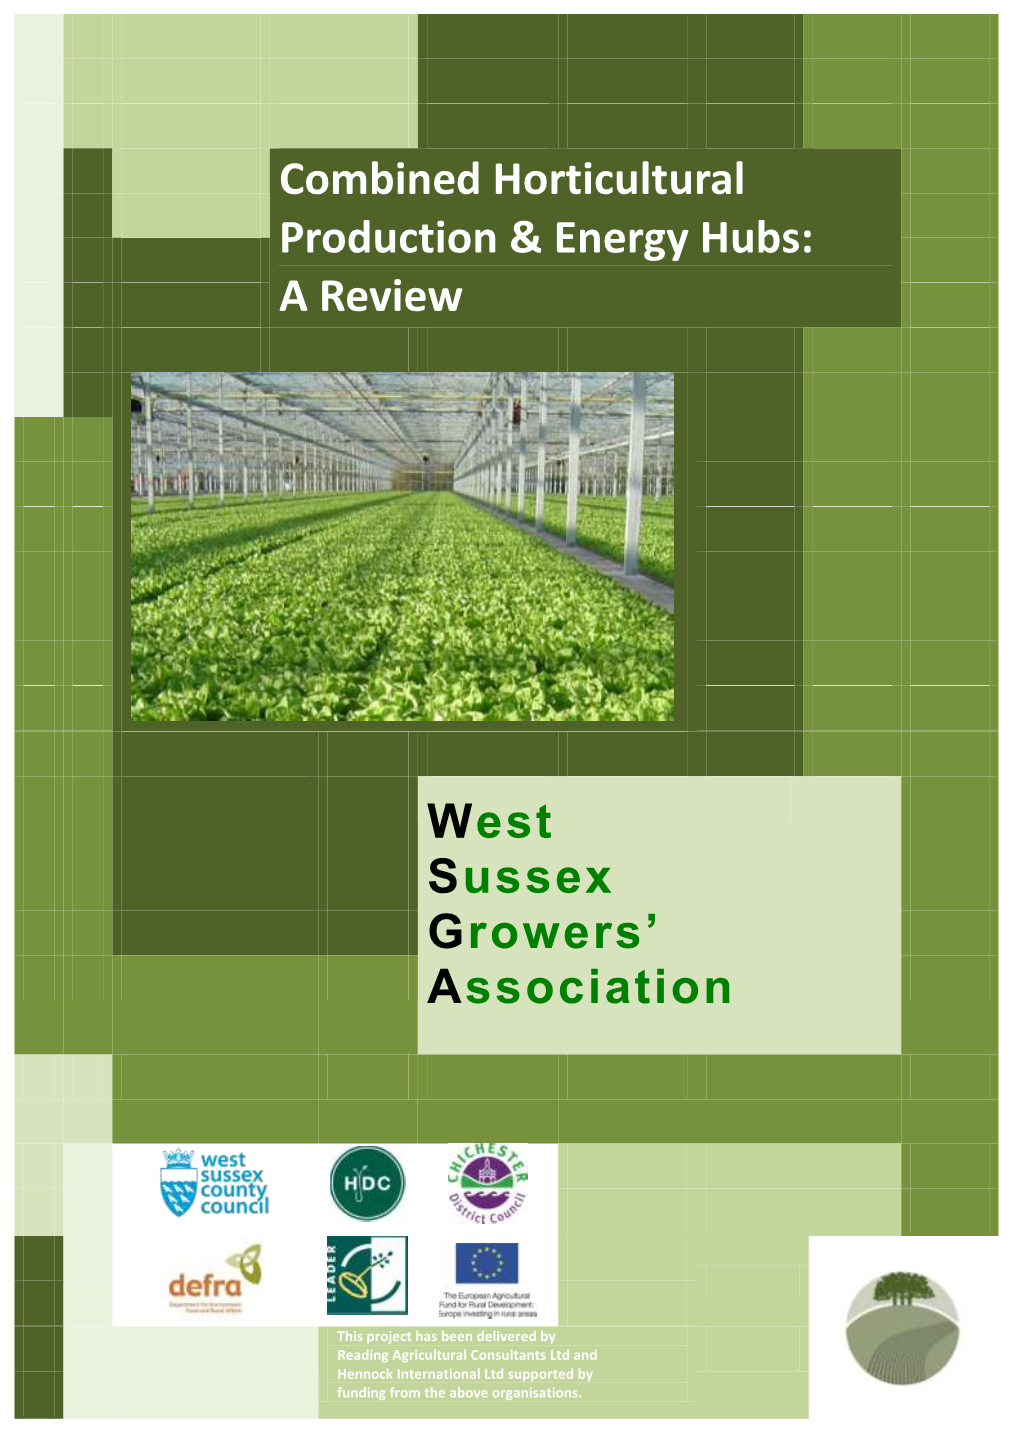 Combined Horticultural Production & Energy Hubs